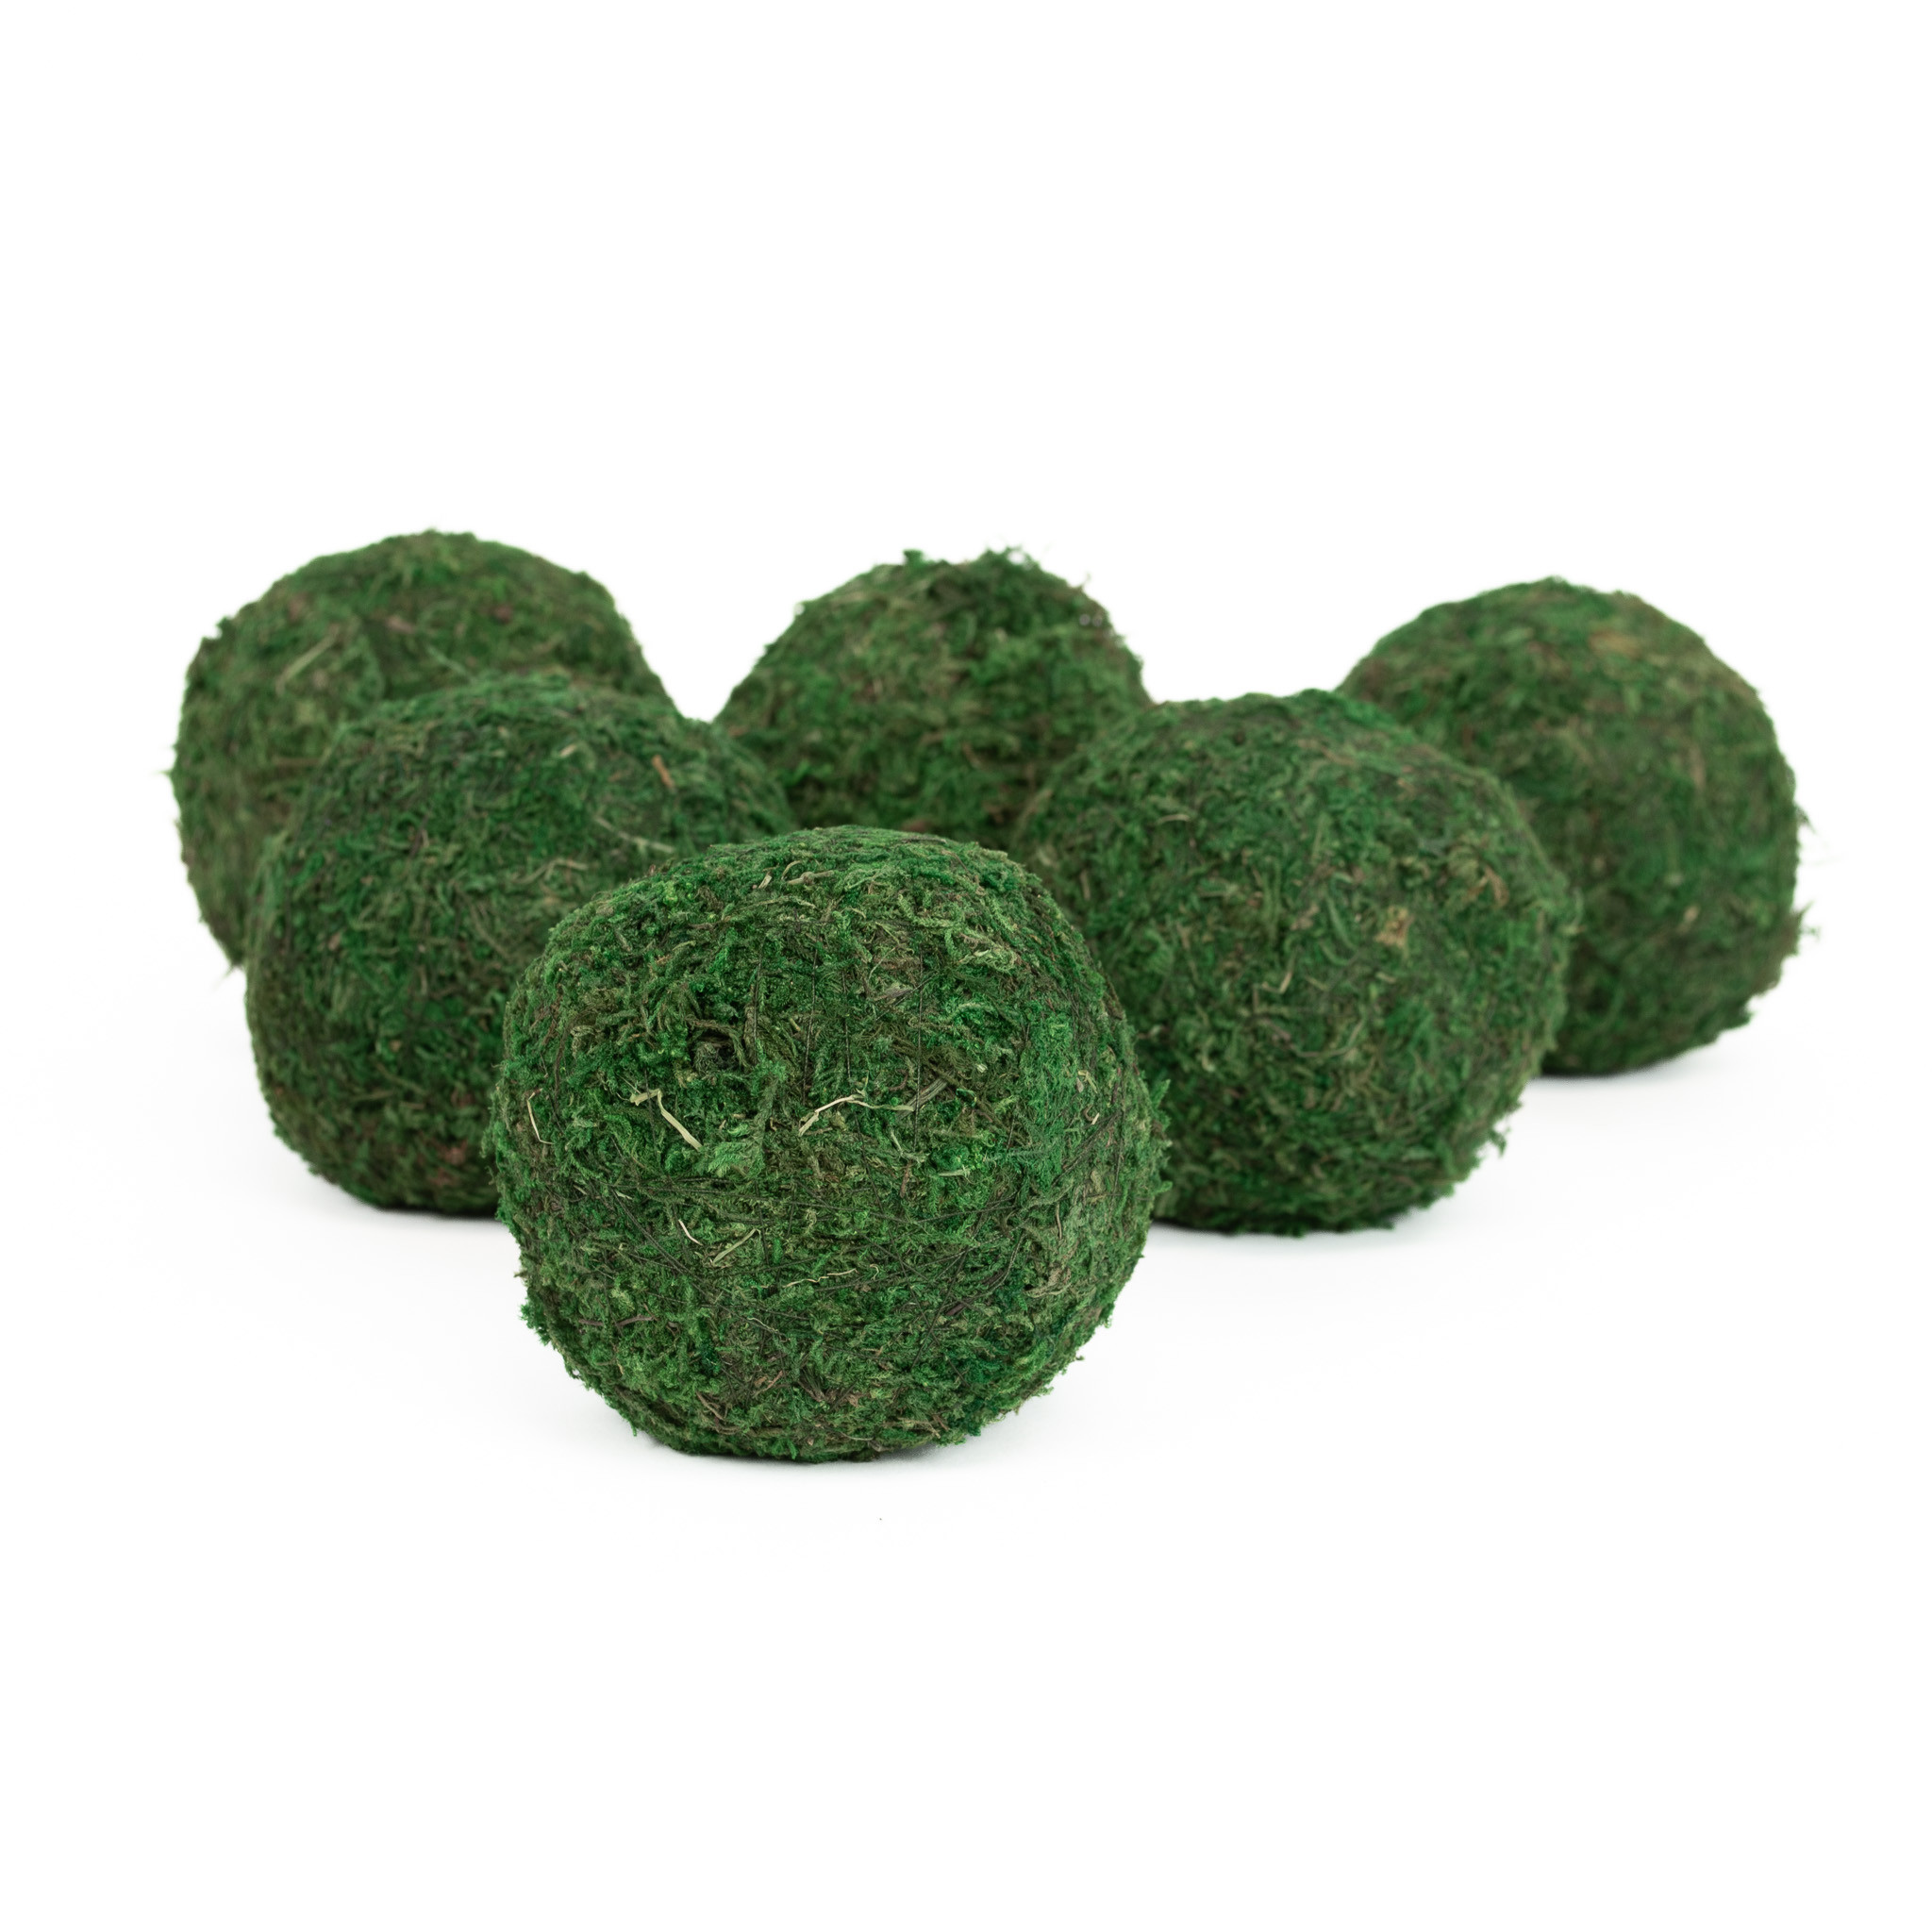 FAUX MOOD MOSS BALL - 3.5 INCH - Mills Floral Company